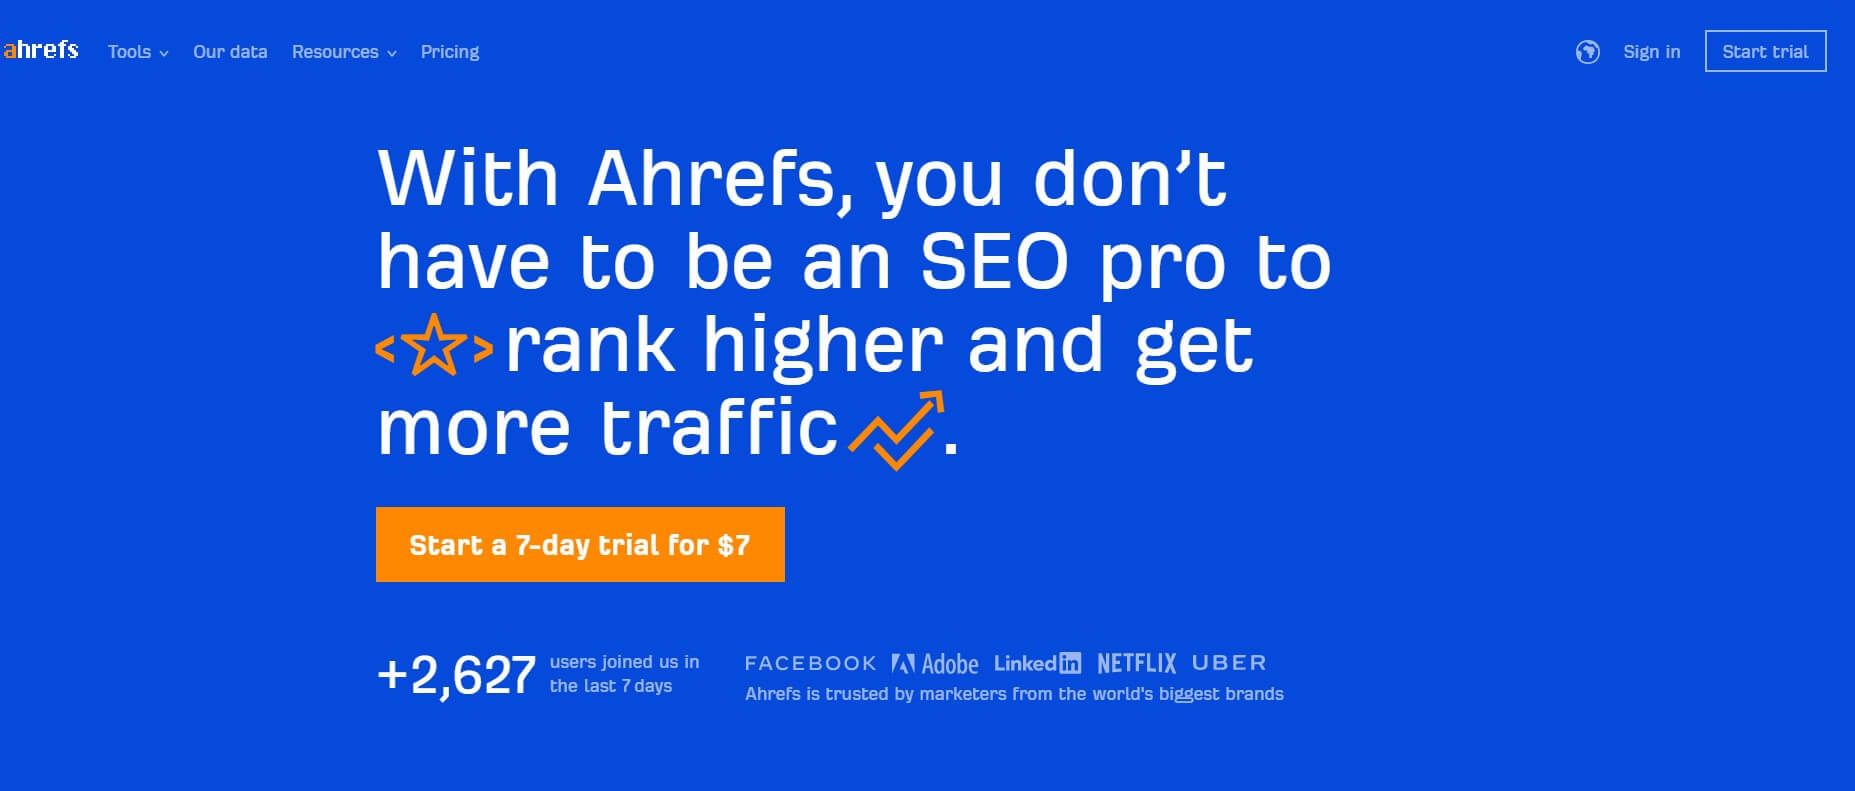 Ahrefs the great B2B SEO tool to effectively use b2b SEO and b2b content marketing for lead generation.